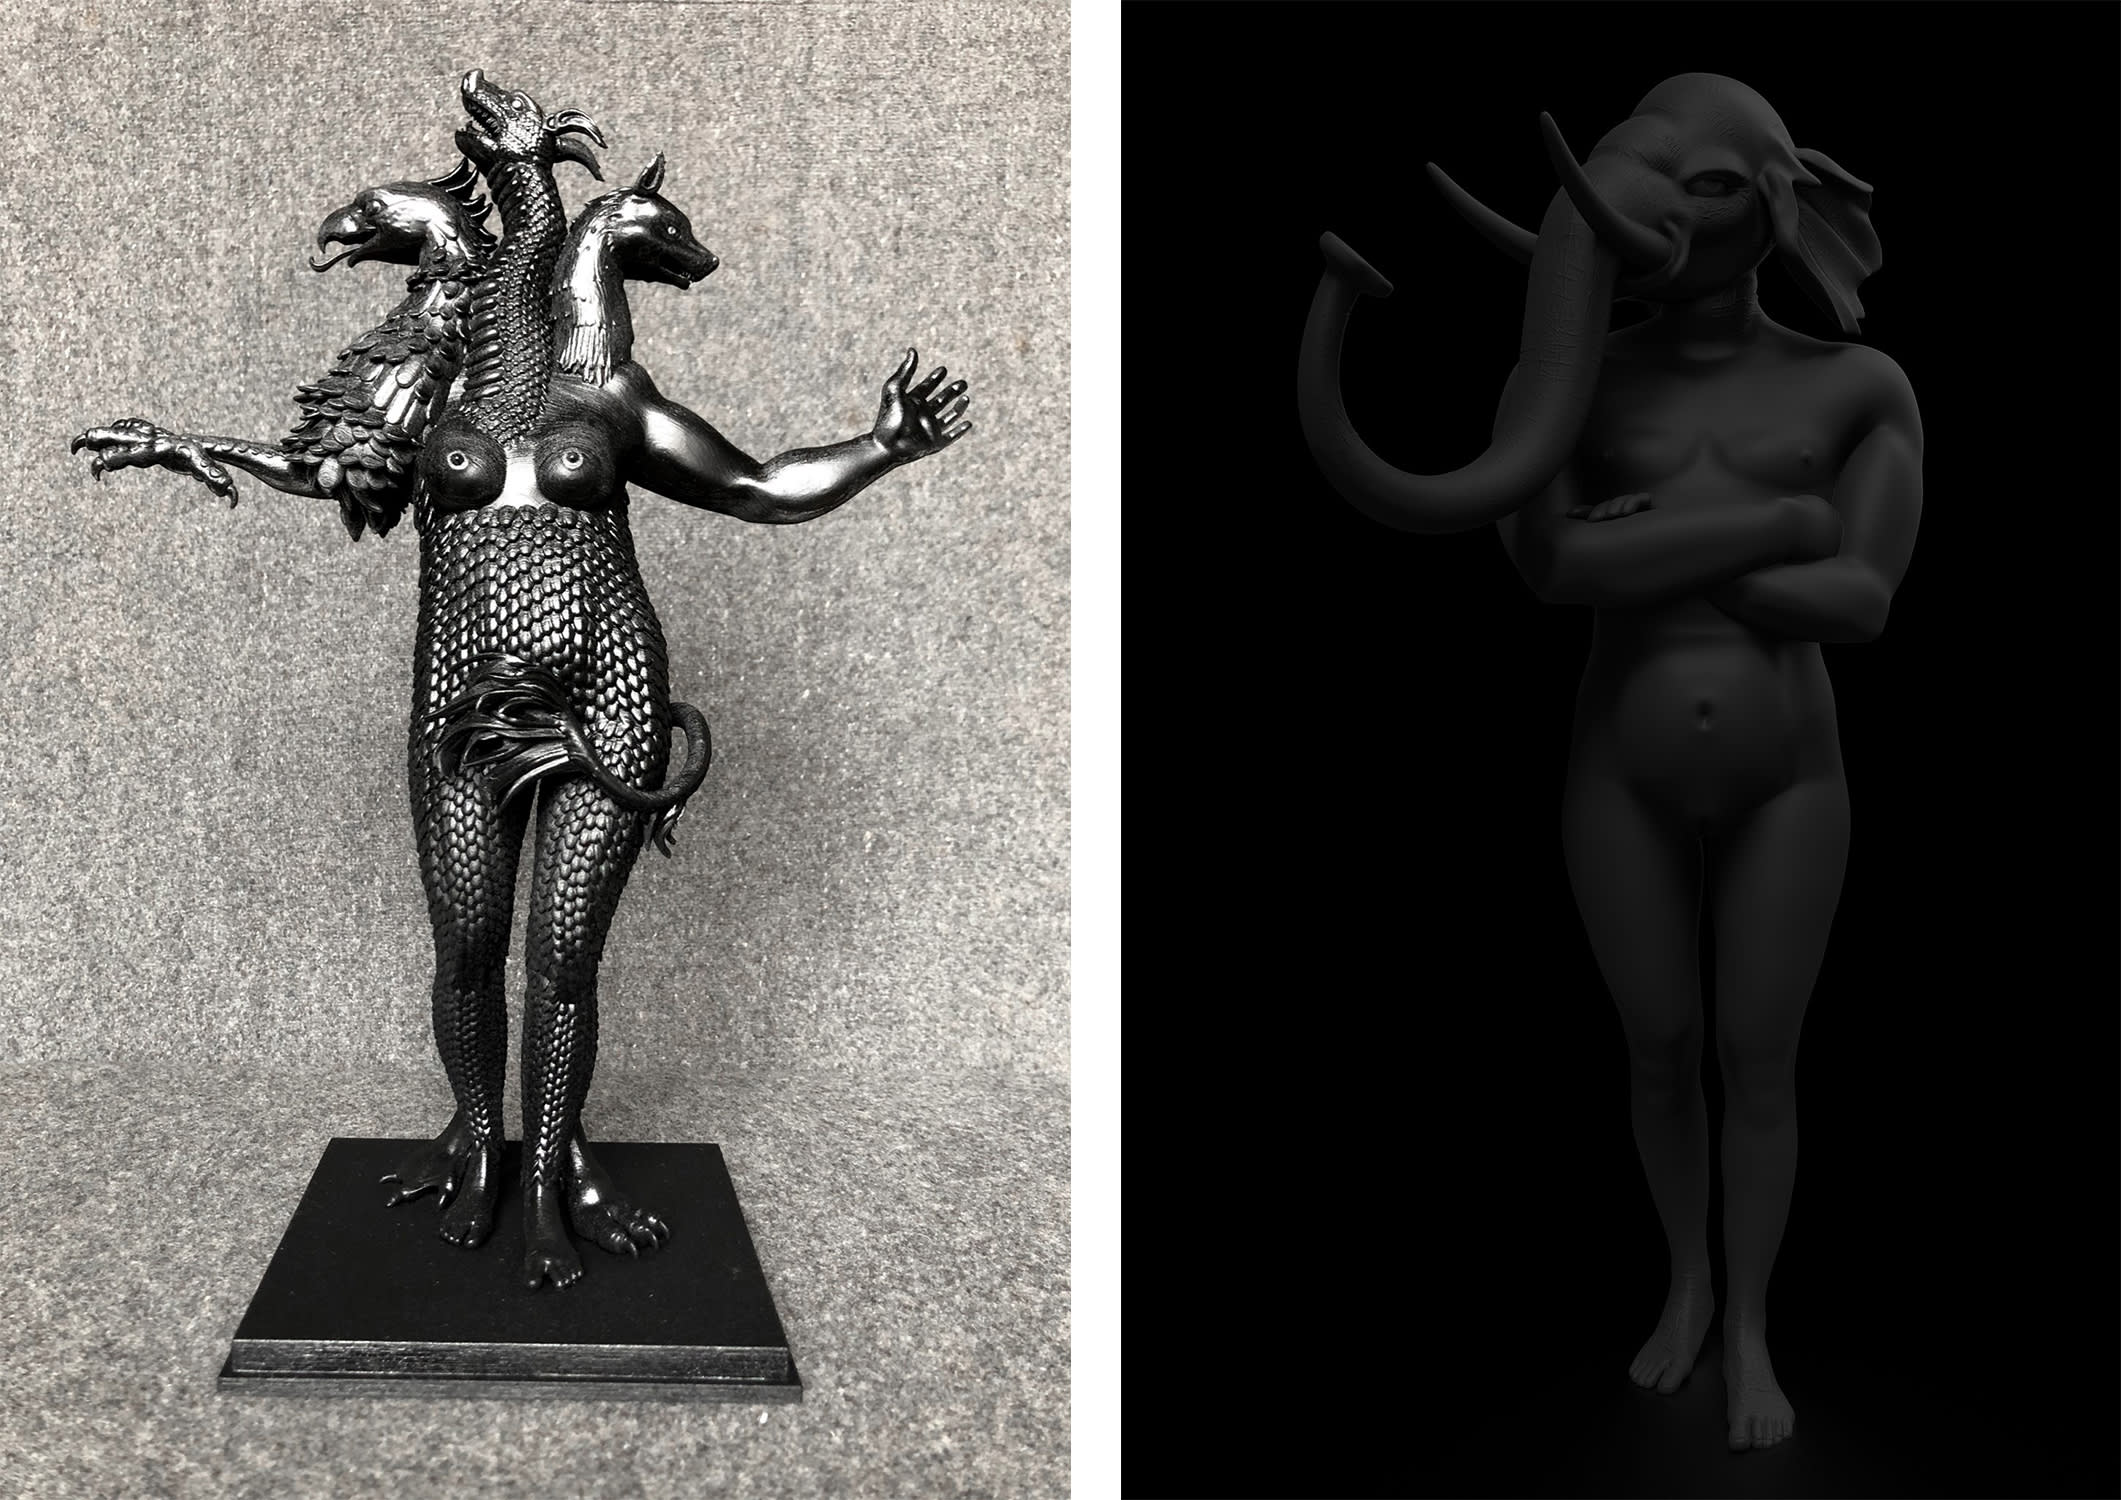 Left: Carlos Motta, THE PSALMS - Monstrum triceps capite vulpis, draconis, & aquilae, 2018. Courtesy of mor charpentier, Paris. Right: Carlos Motta, THE PSALMS - Figure of a man with an elephant head, 2018, Courtesy of mor charpentier, Paris.